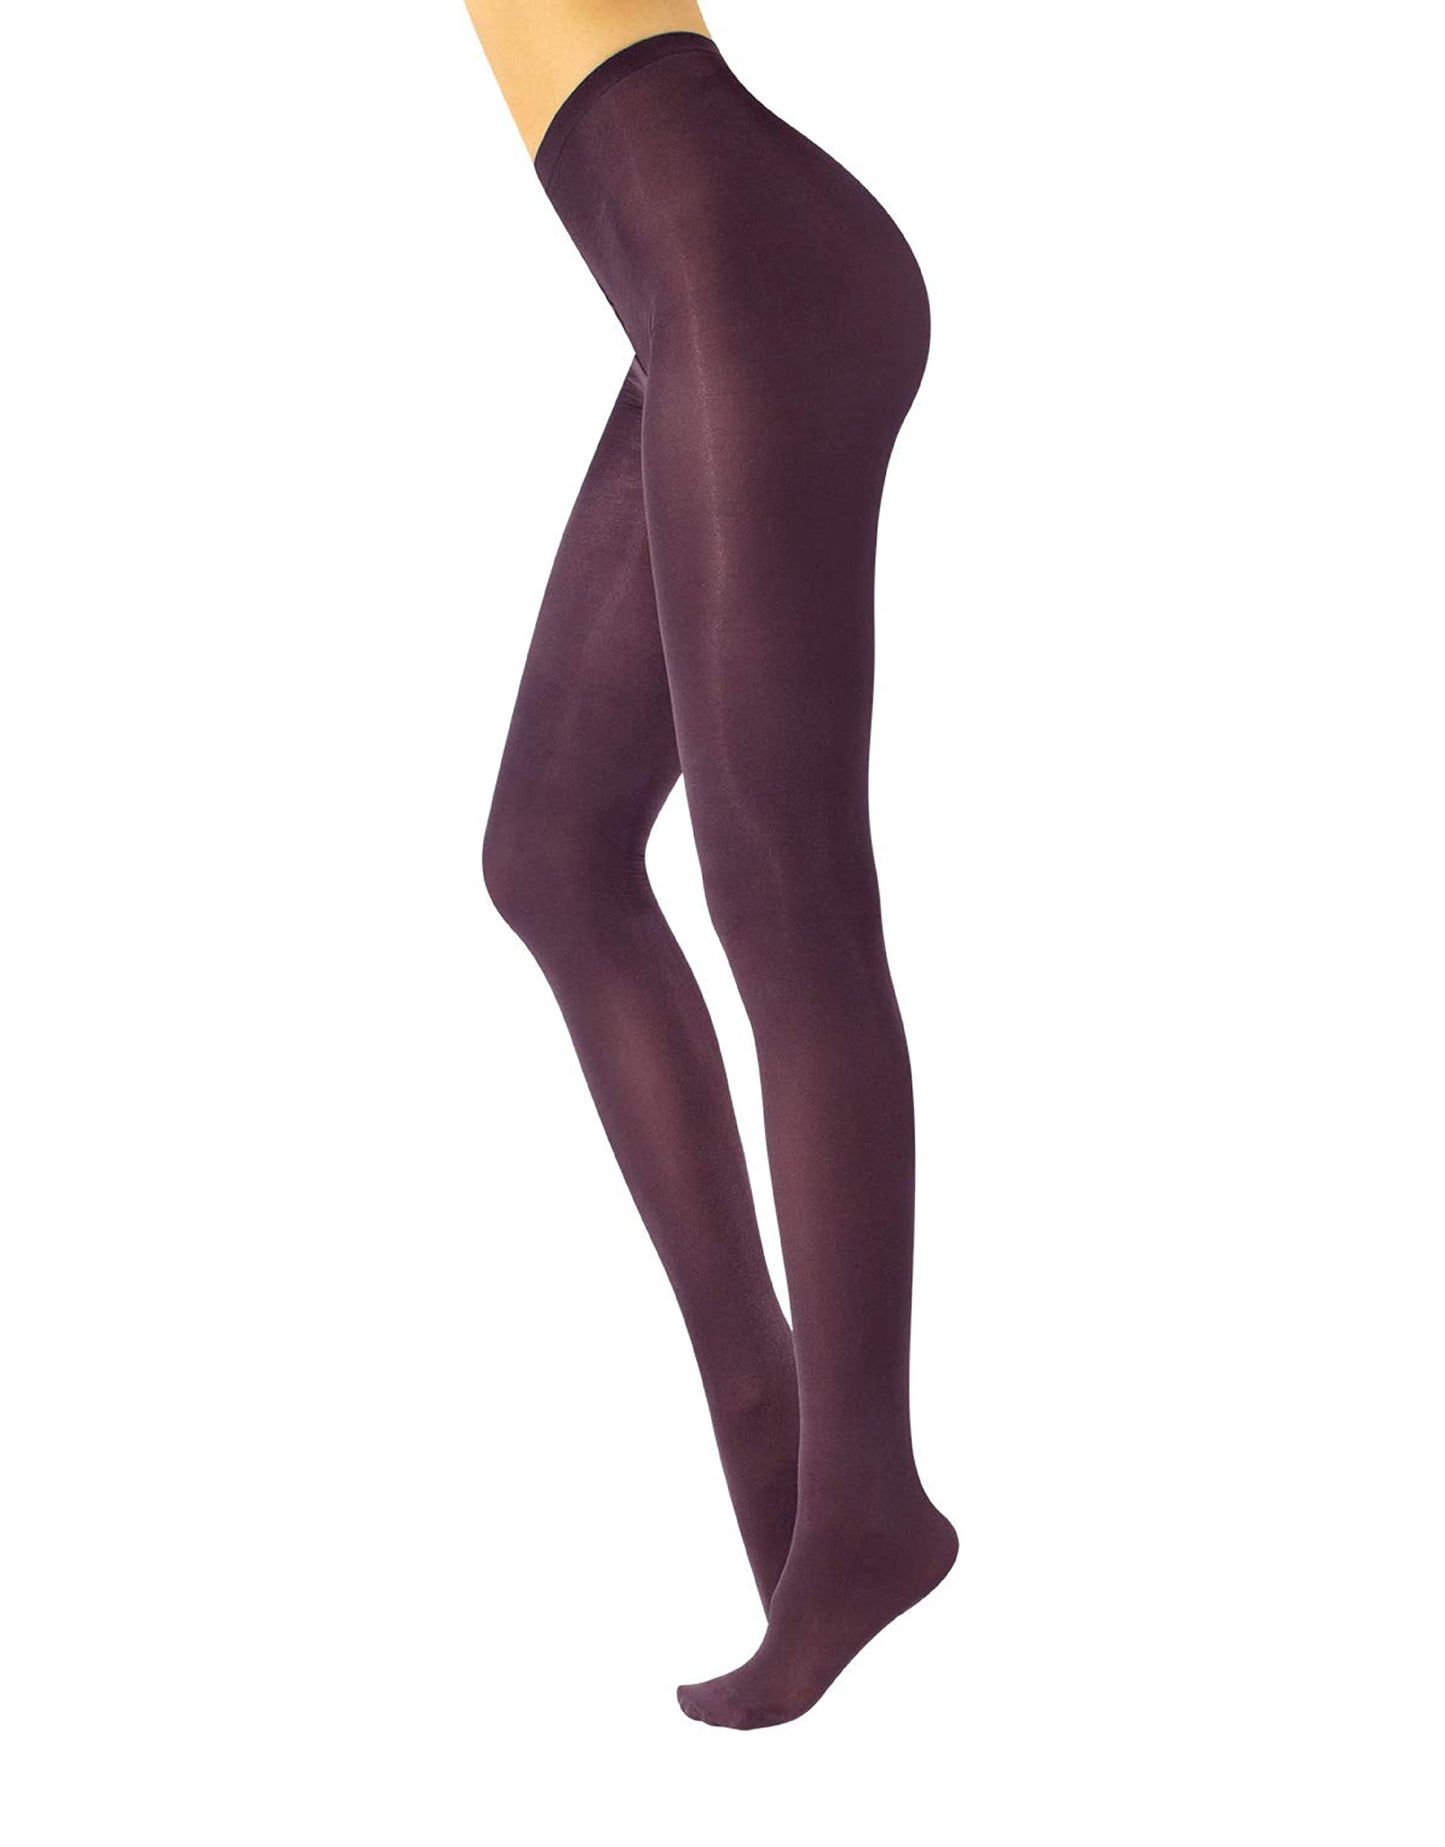 Calzitaly Glossy Tights - Dark Purple ultra opaque tights with a shiny satin finish.